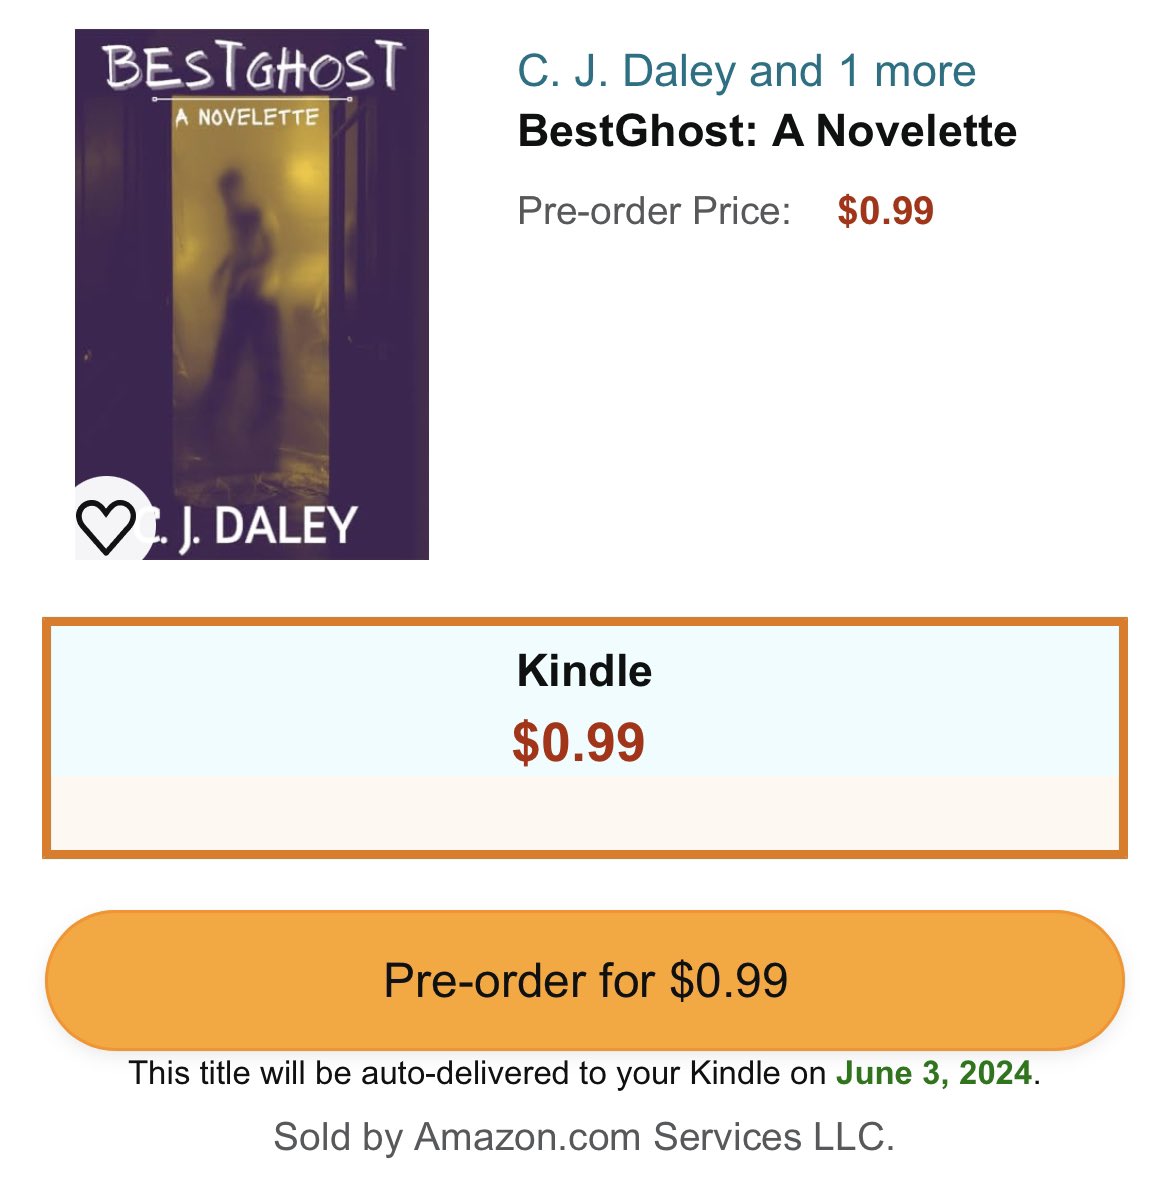 Big day for me here friends, this is my first ever preorder, my first ever wide release! I’d certainly love some reshares, boosts, and even some orders for the rerelease of BestGhost please! #Preorder books2read.com/u/bzql8q